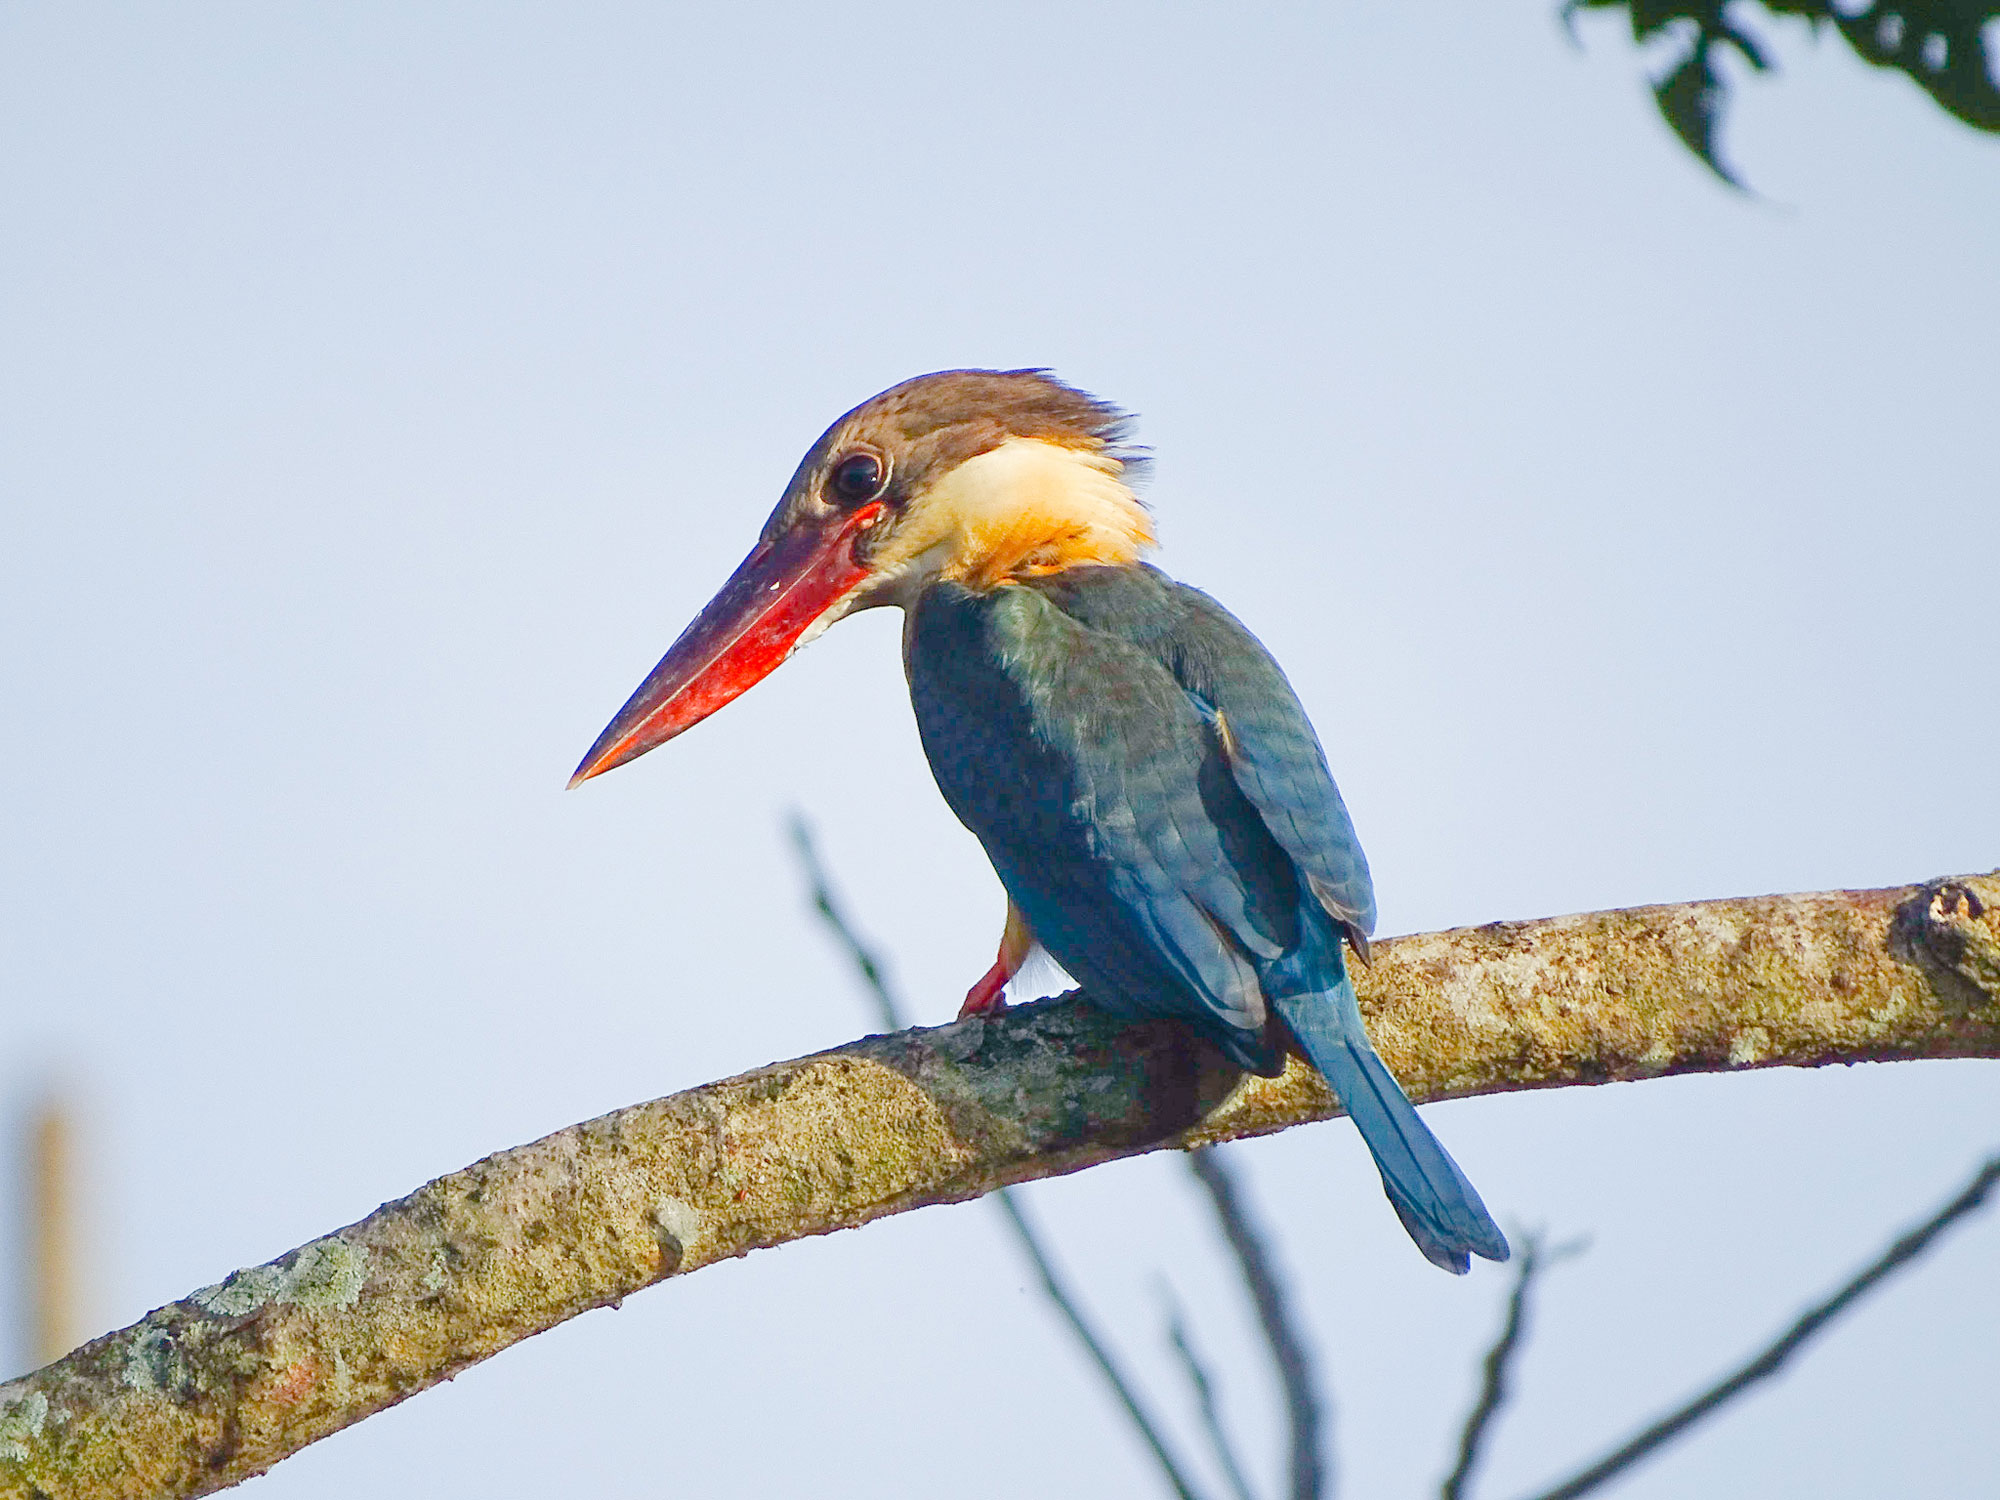 Photograph of a stork-billed kingfisher sitting on a thick branch. The photo shows a relatively large bird with a big reddish-orange beak, a brown and white head, and blue wings and tail.